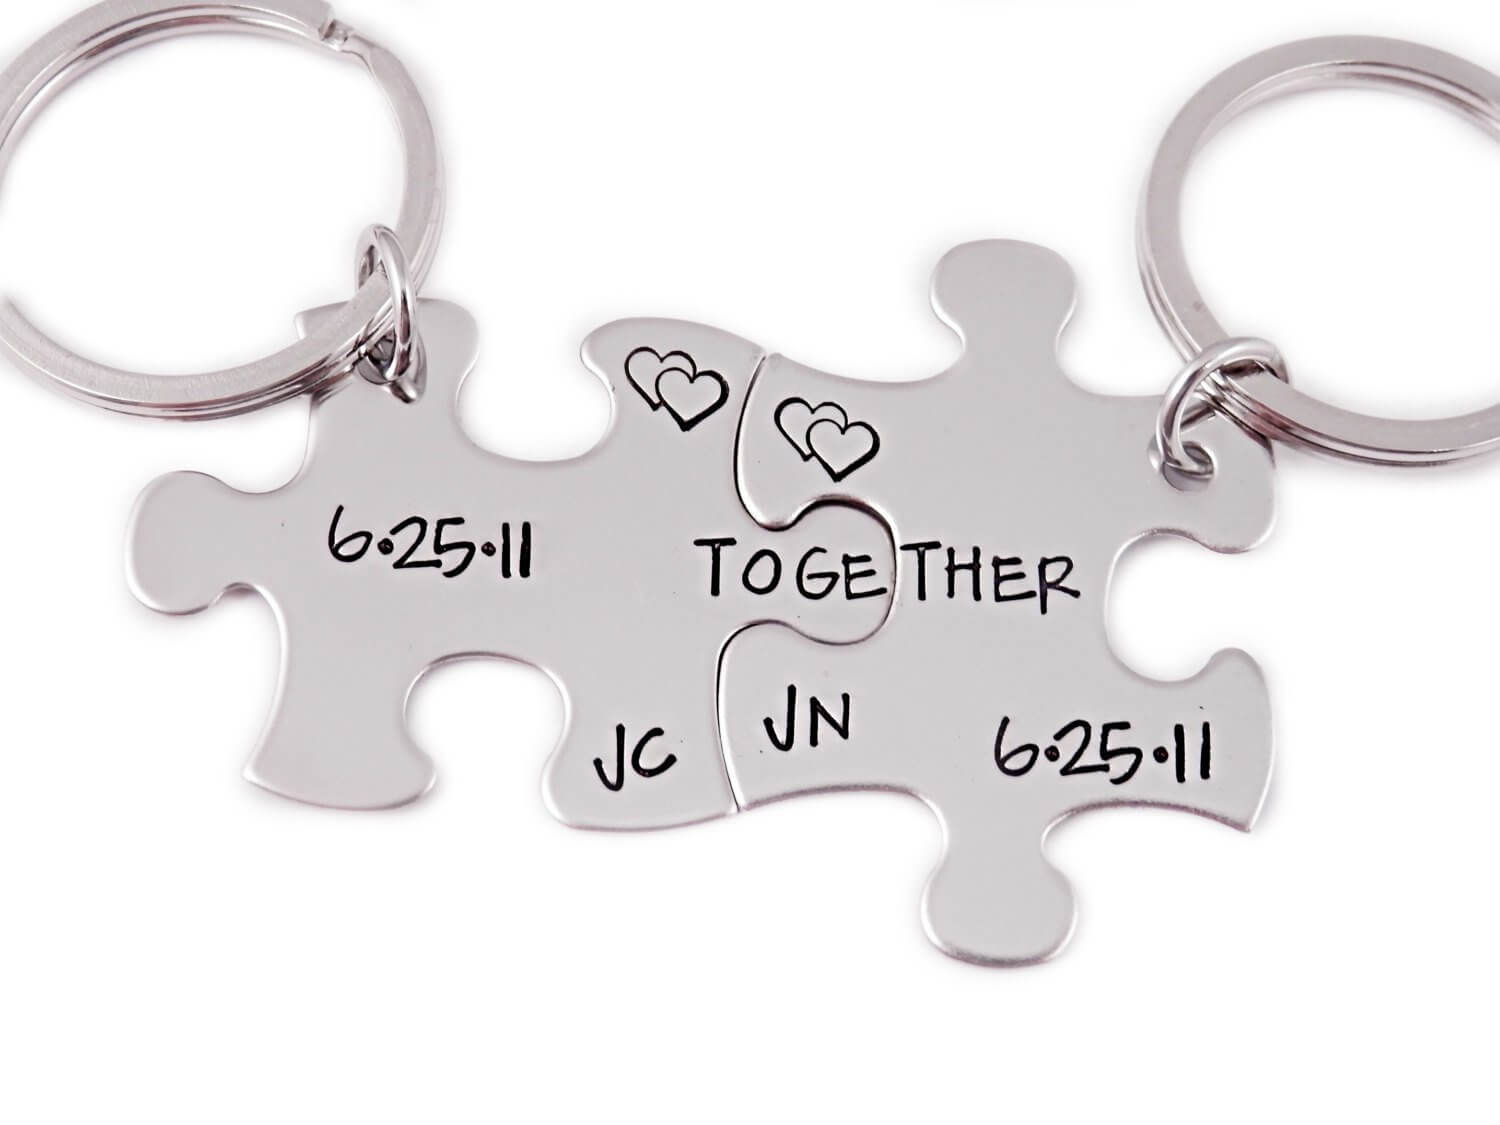 Personalized Engraved Toolset or Keychain